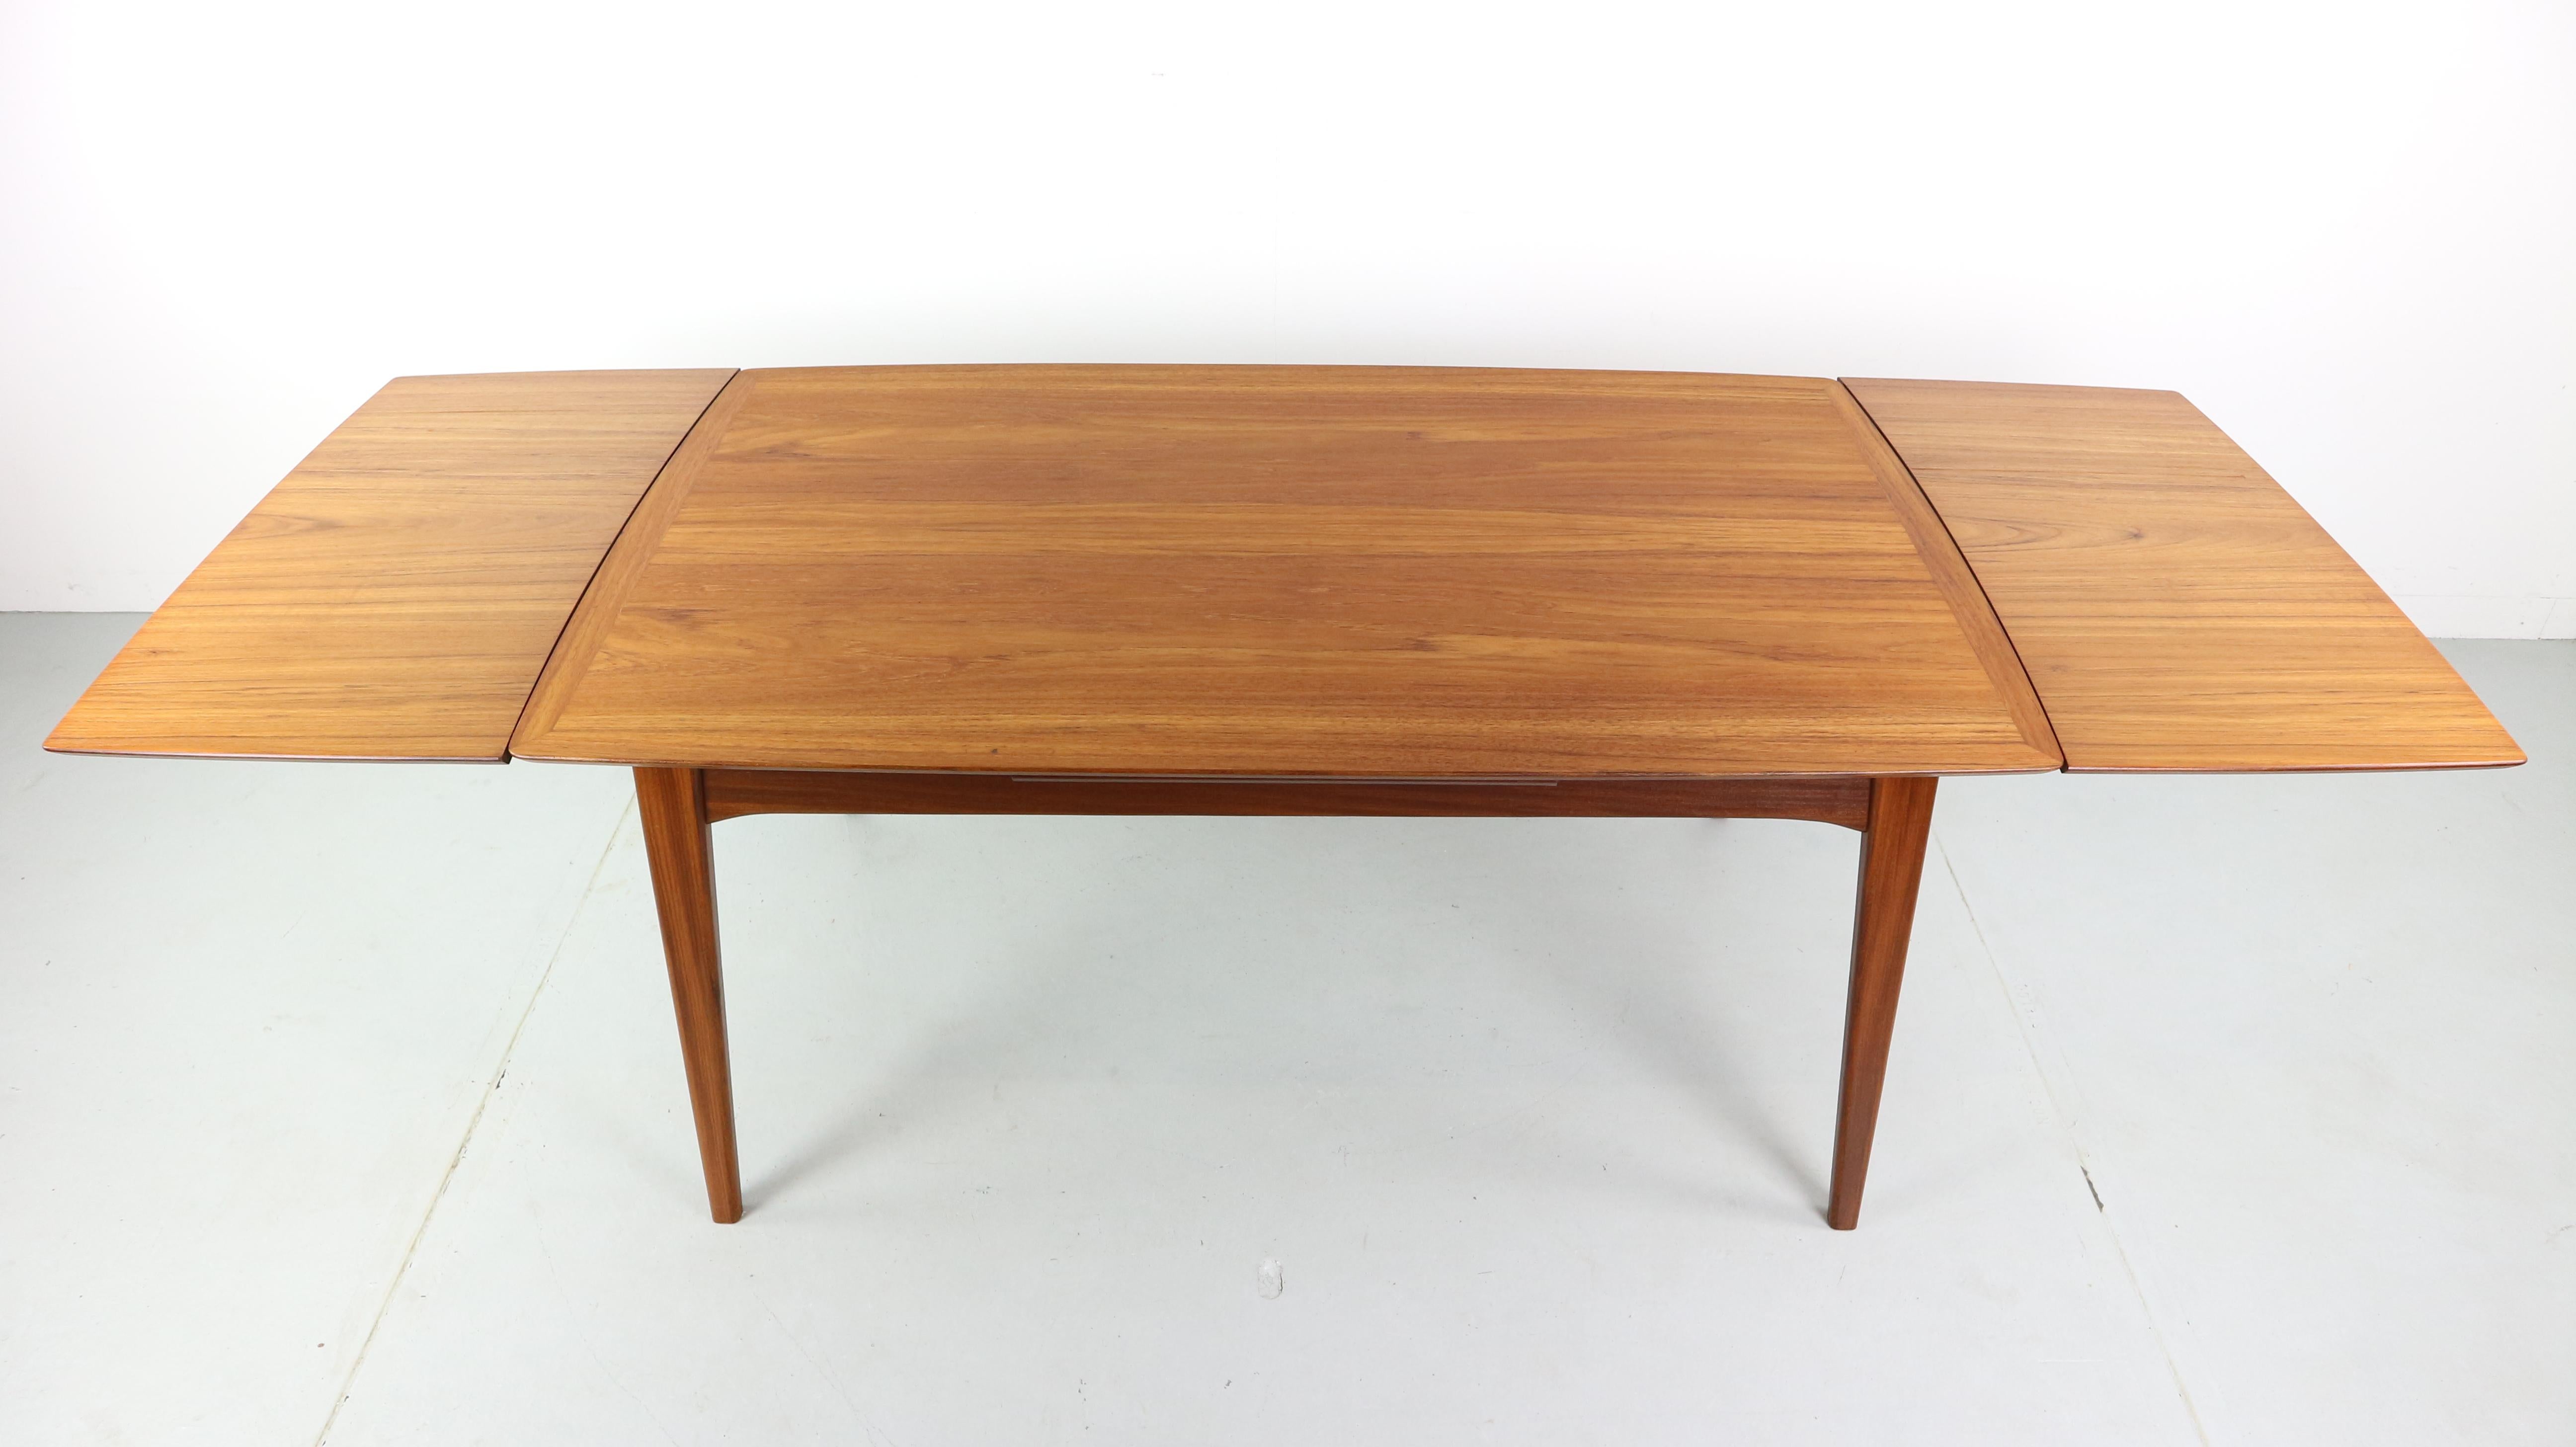 Midcentury teak dining table designed by Louis Van Teeffelen for WeBe in the 1950s. The table has beautiful organically shaped lines and is extendable. Remains in very good condition.

Extendable table measurements goes from 150 cm to 197 to 2